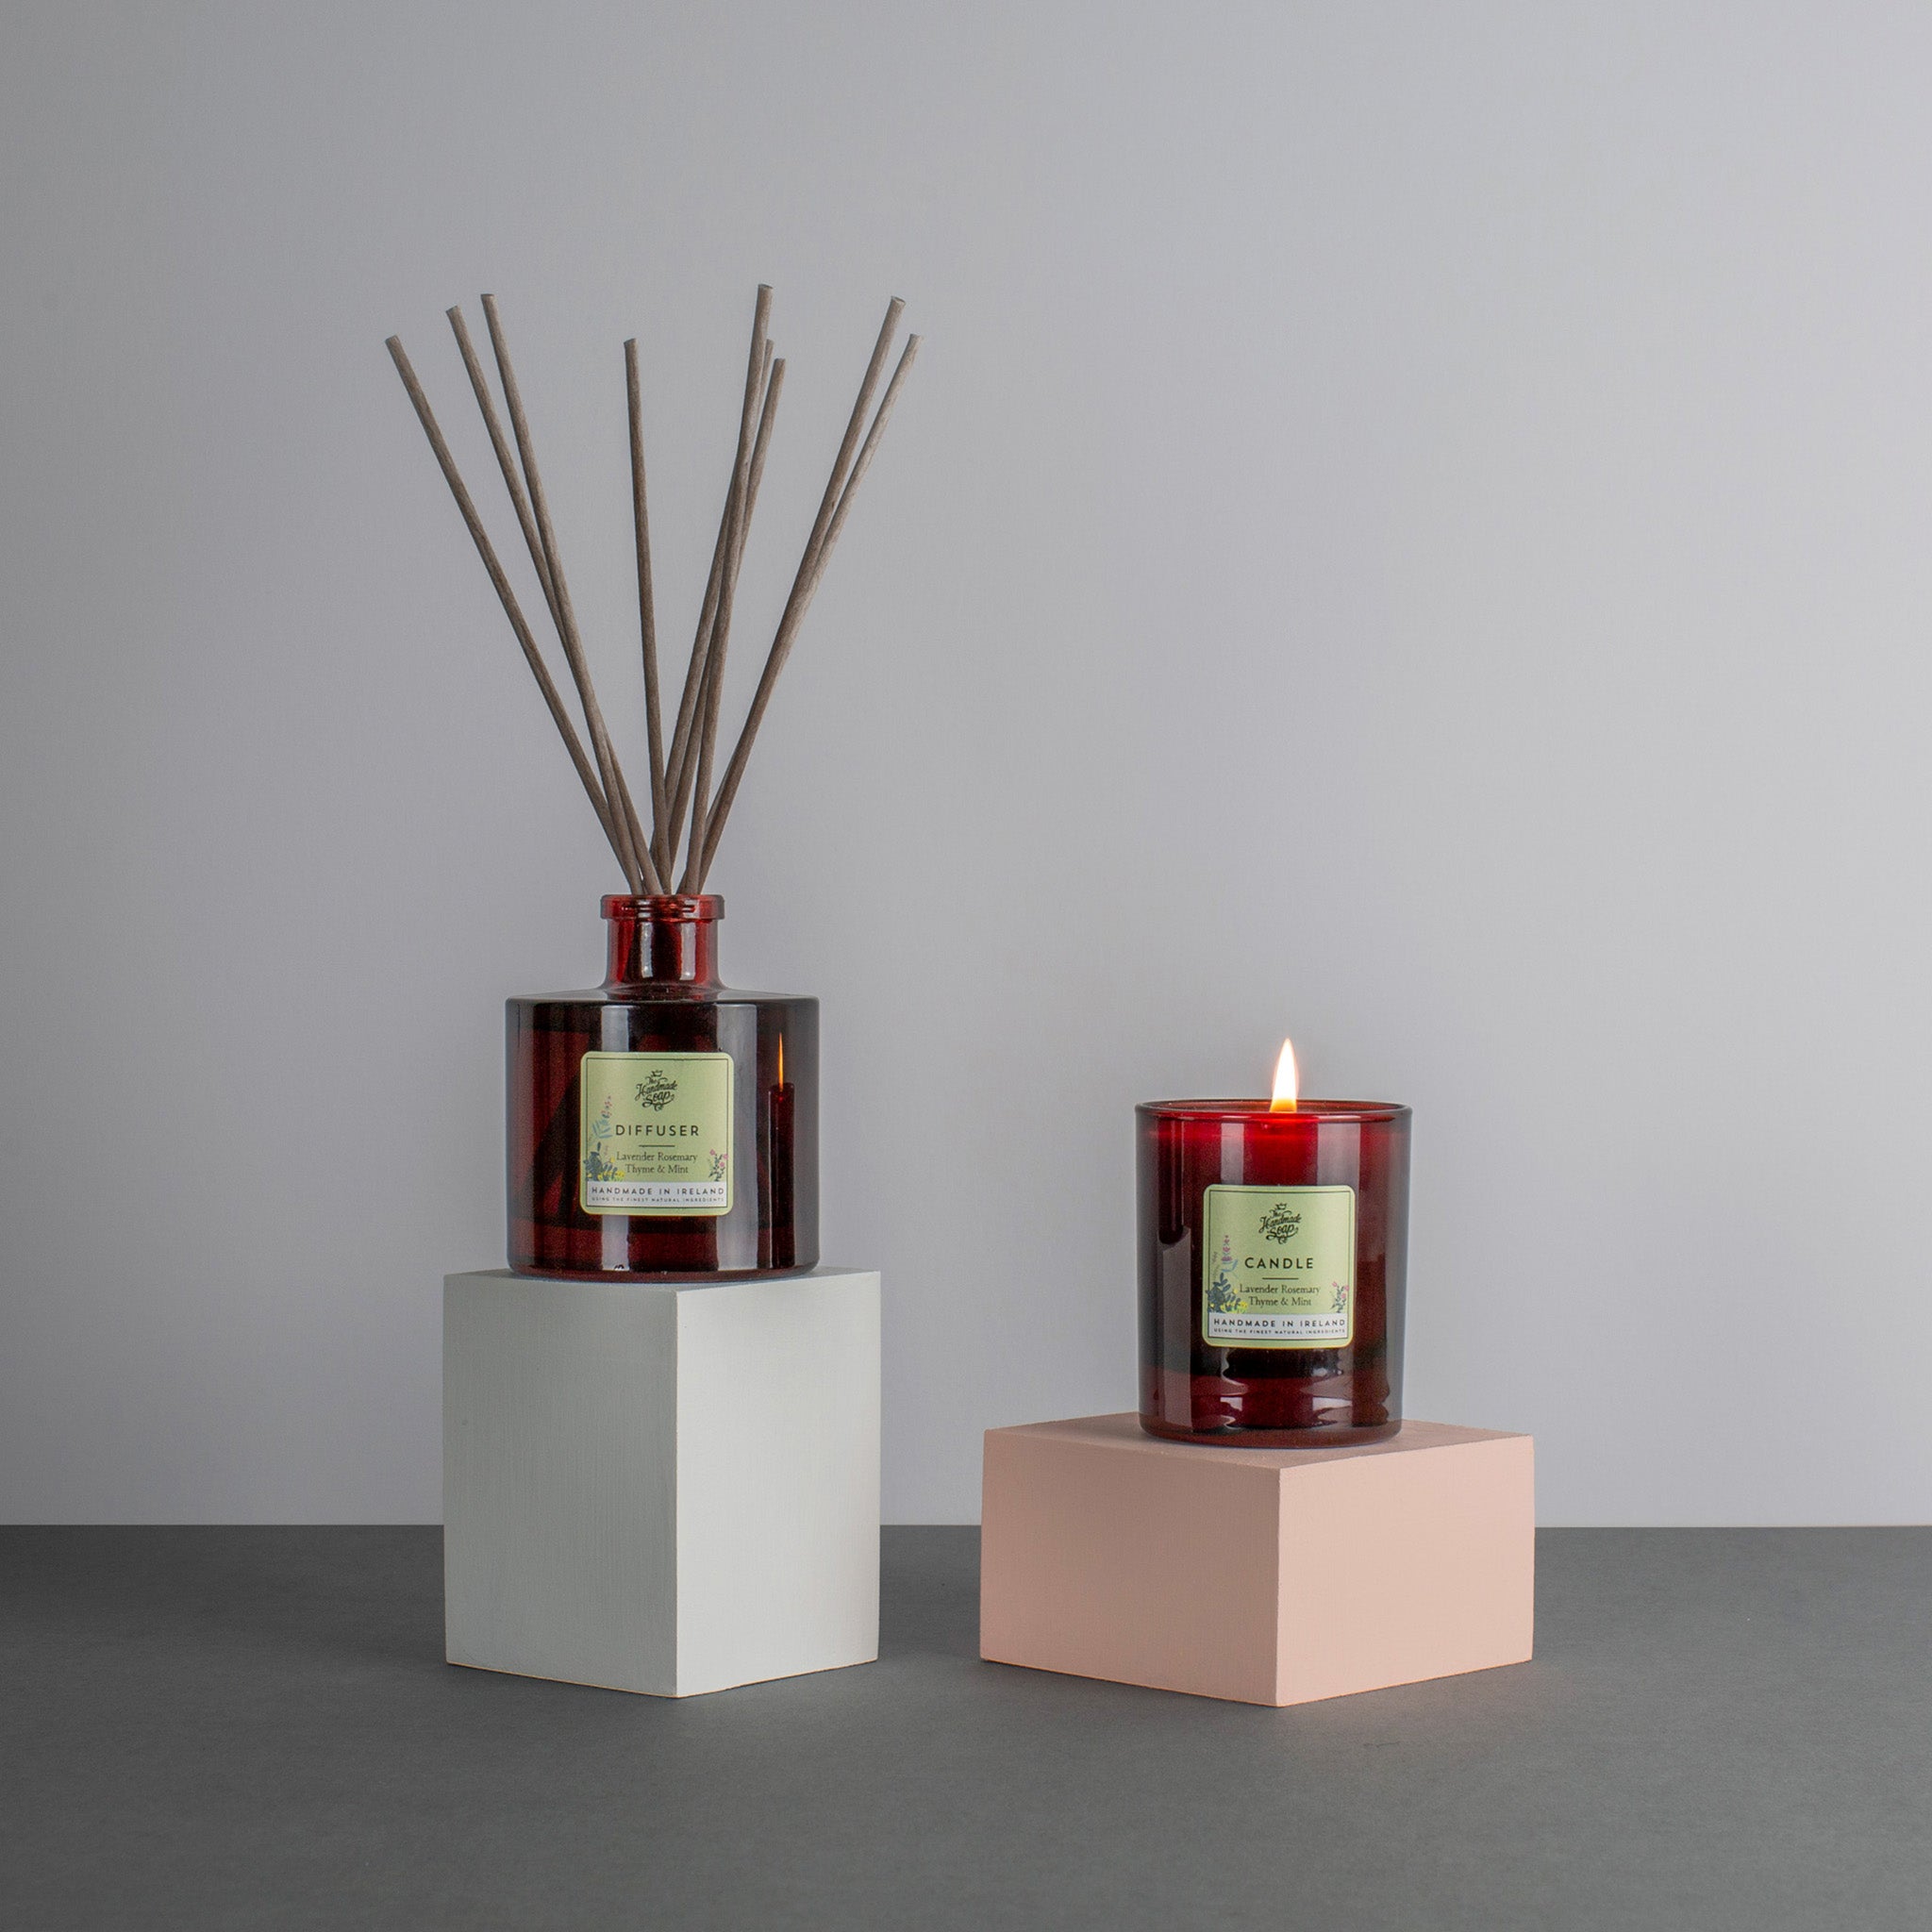 Reed Diffuser | Lavender, Rosemary, Thyme & Mint - mypure.co.uk